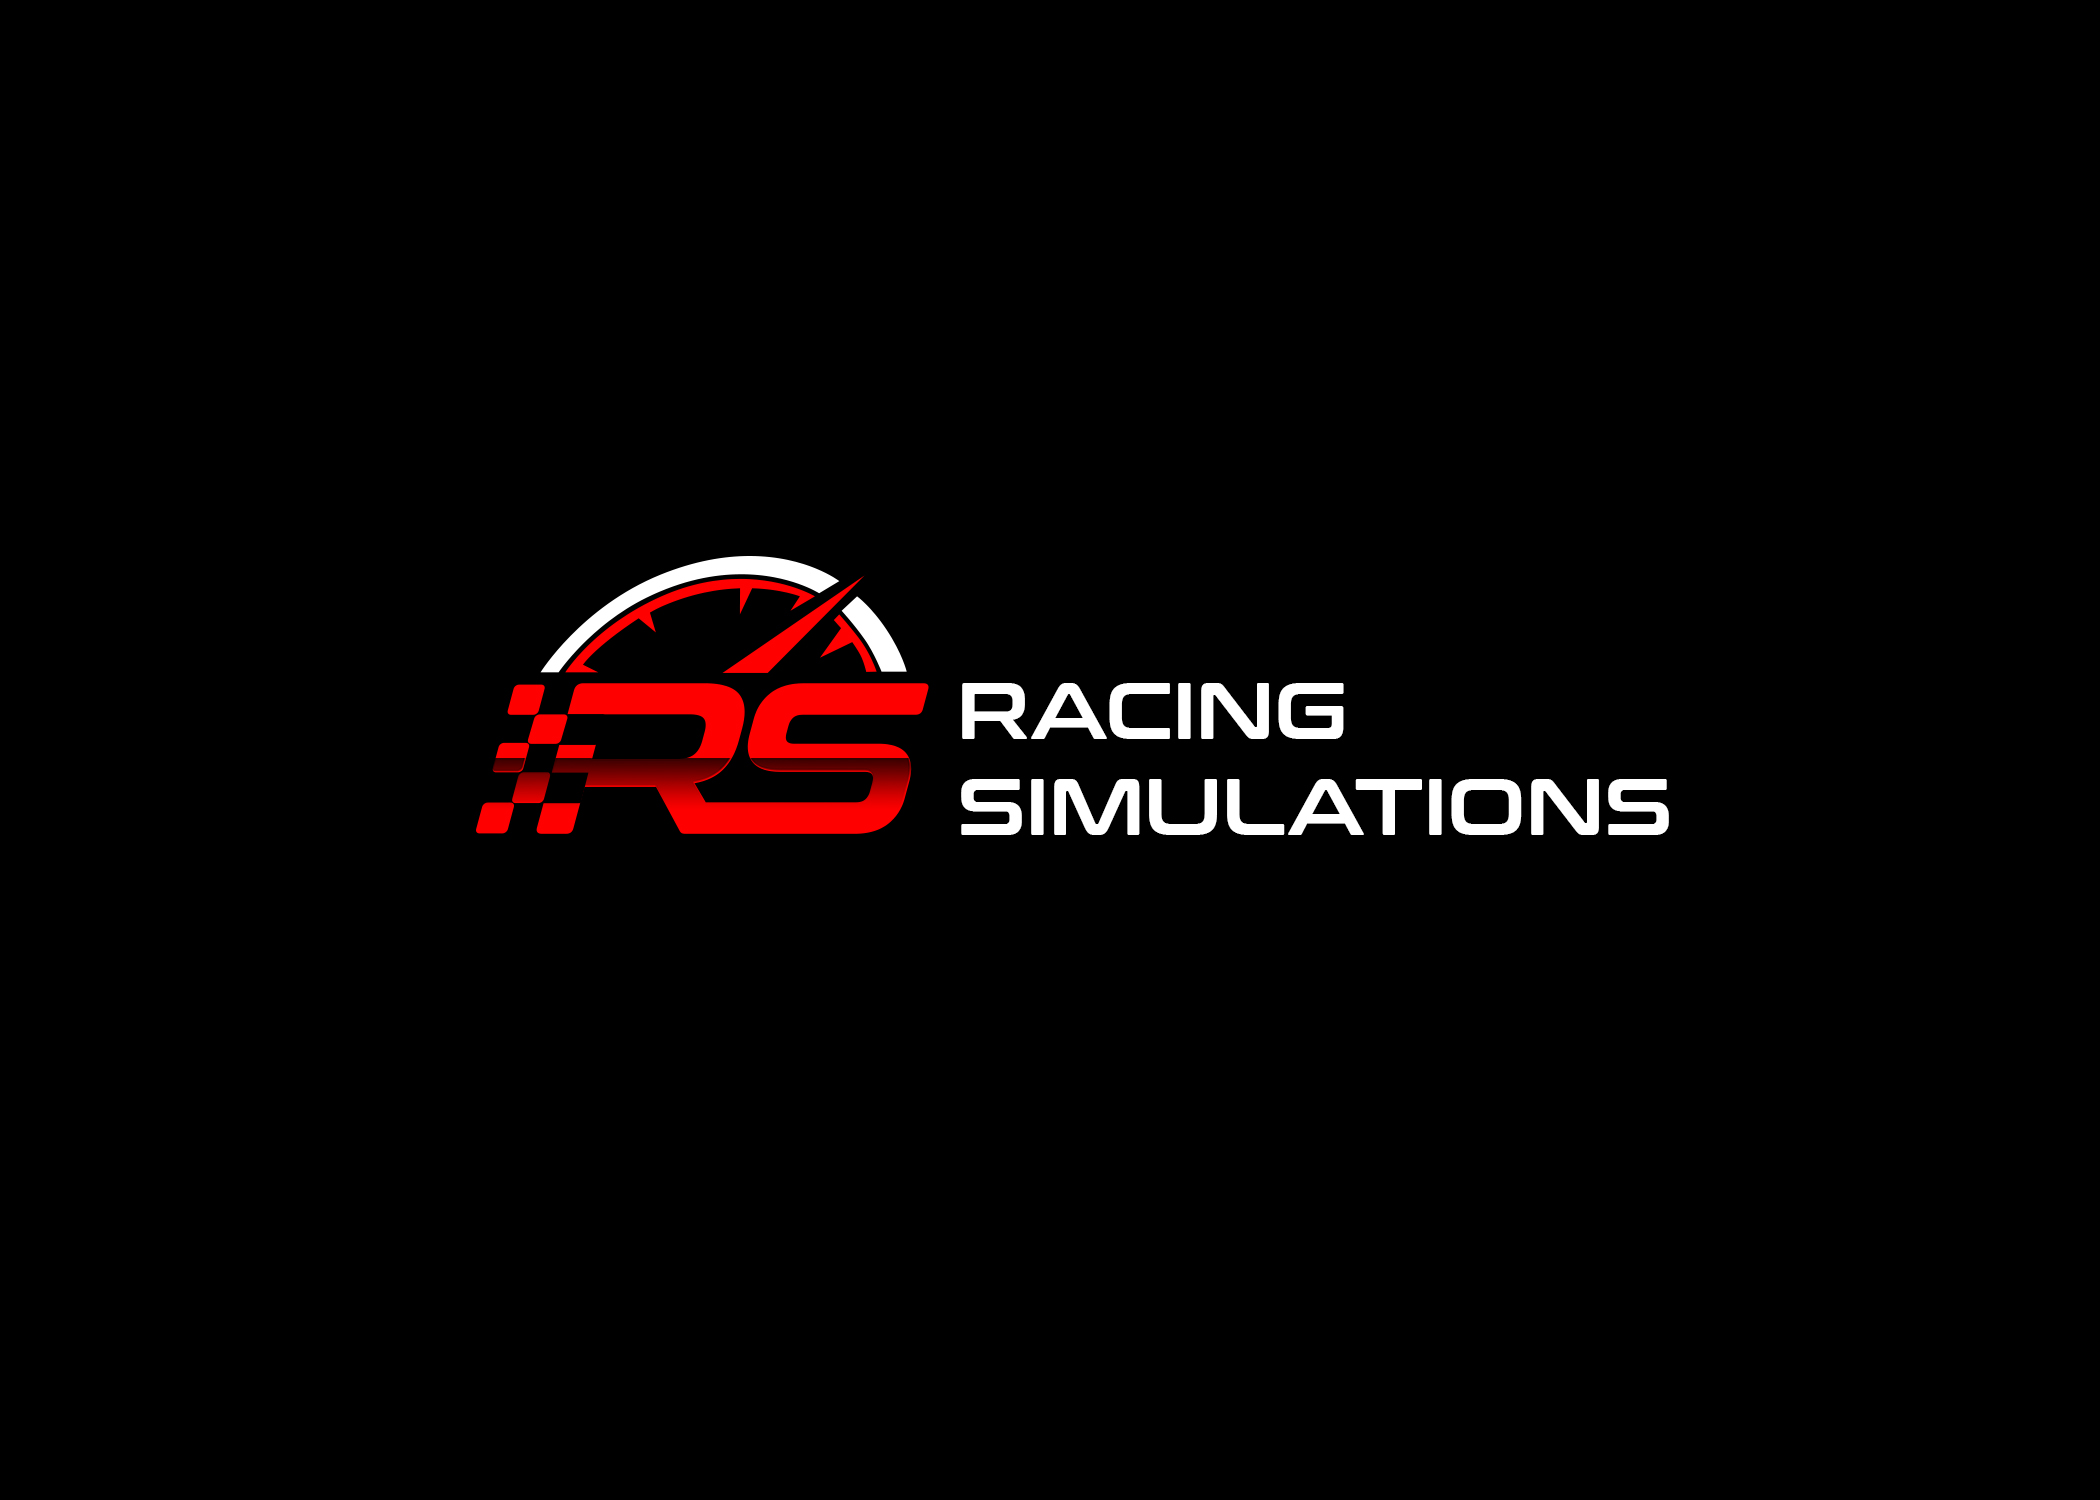 Racing Simulations by Hocky